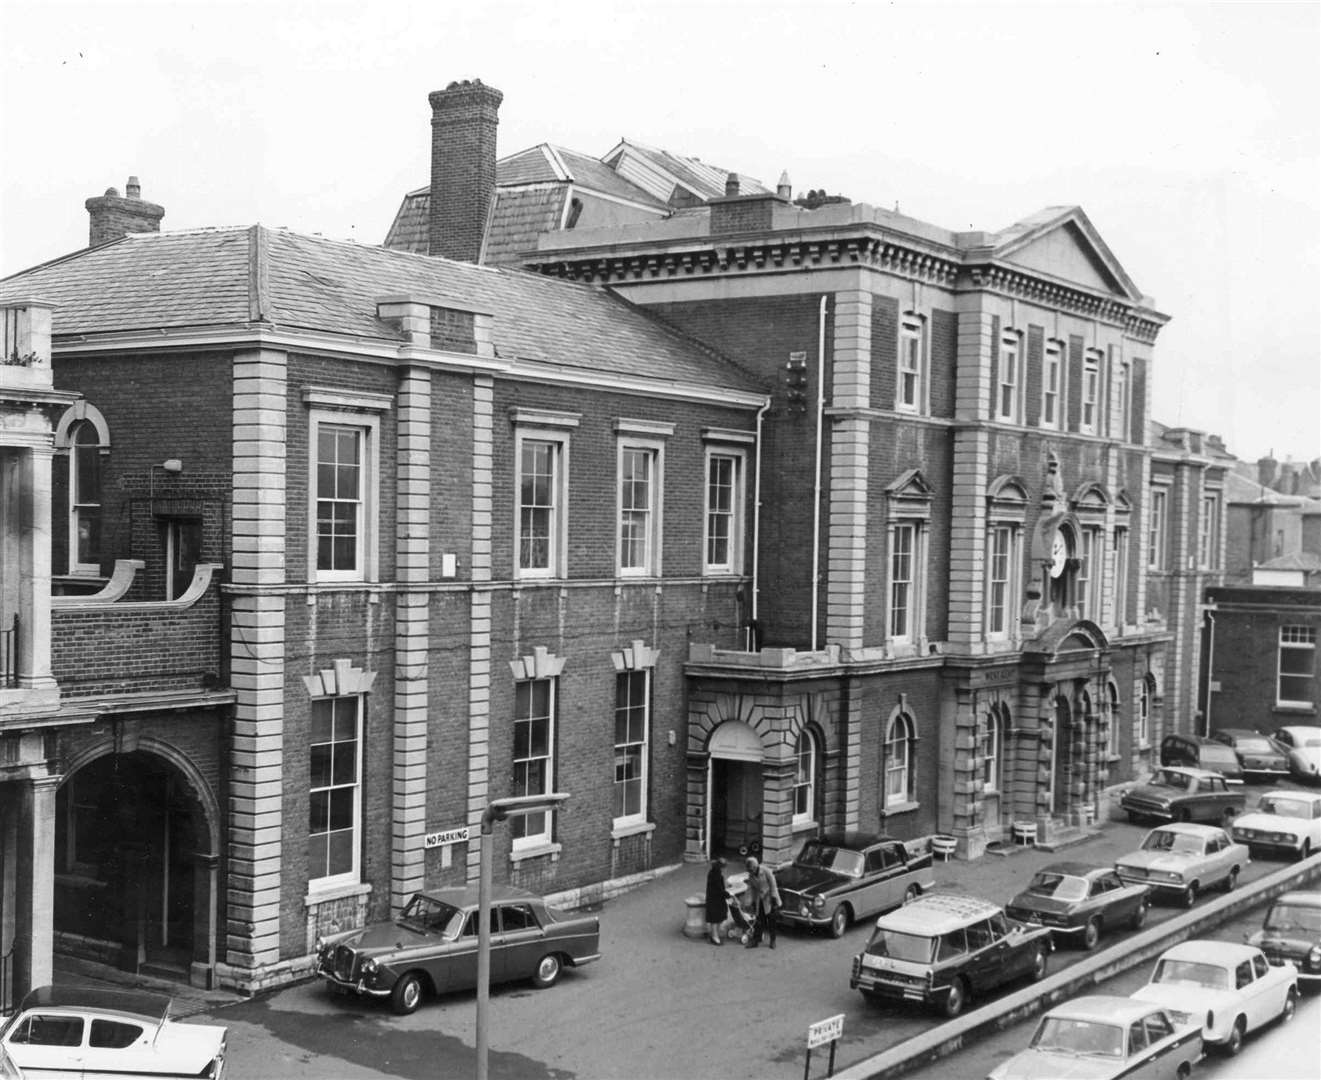 West Kent Hospital in Marsham Street was in service for more than 150 years before the new Maidstone Hospital opened in Barming in the 1980s. Picture: Images of Maidstone